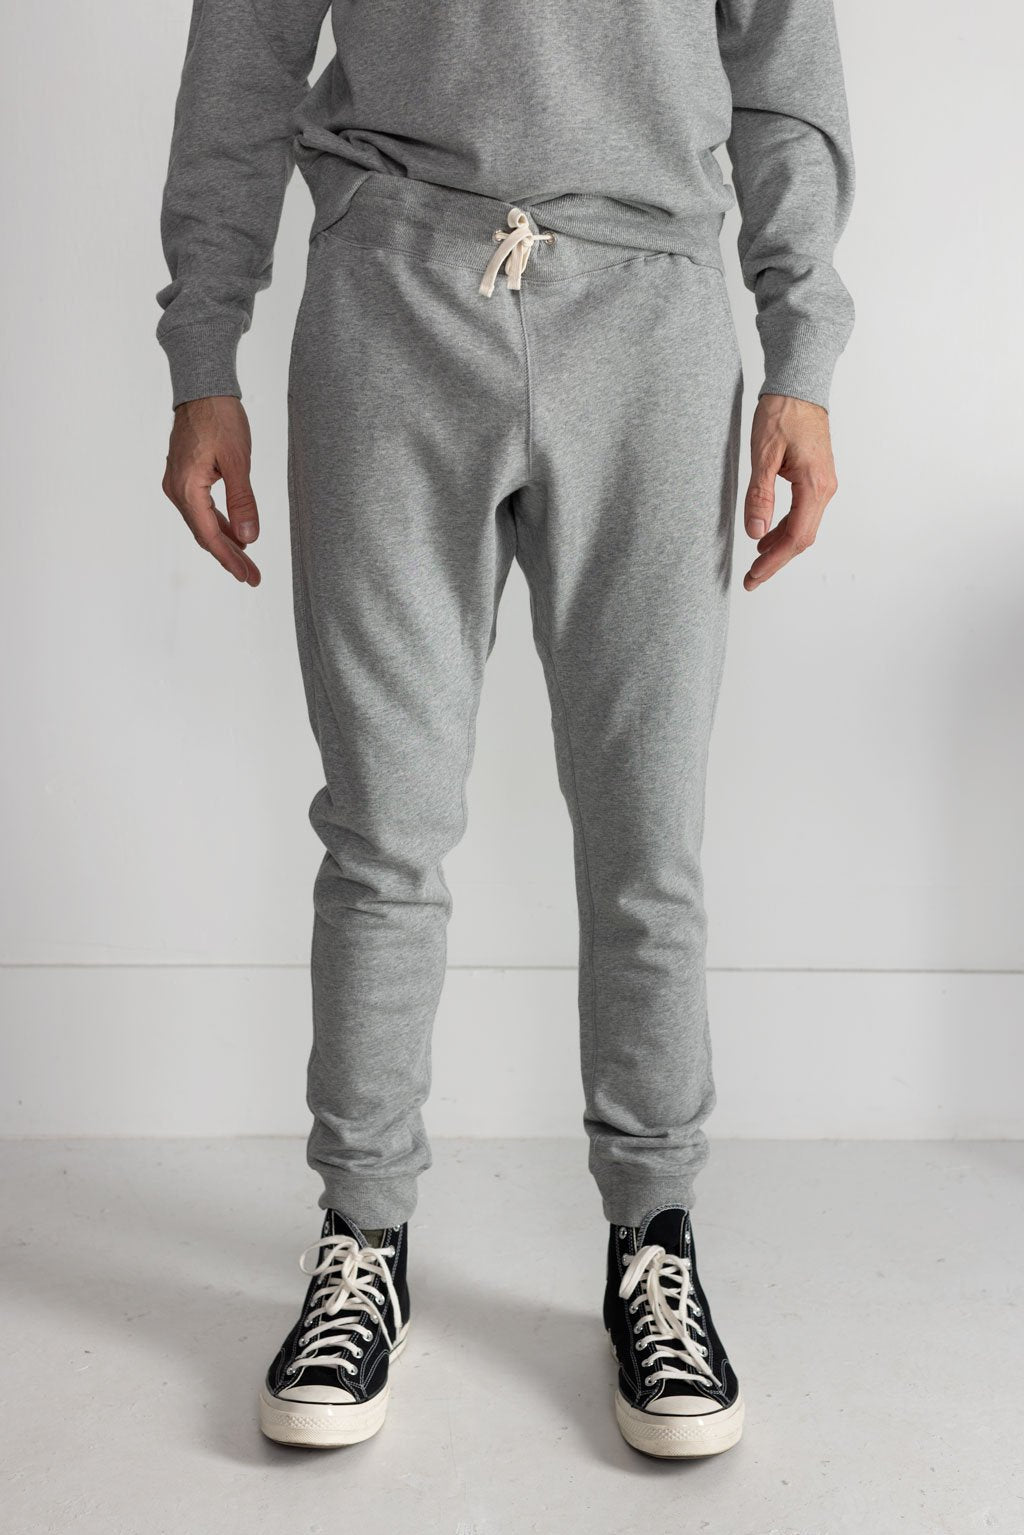 NS2167-3 250g French Terry Sweatpants in Melange Grey 01